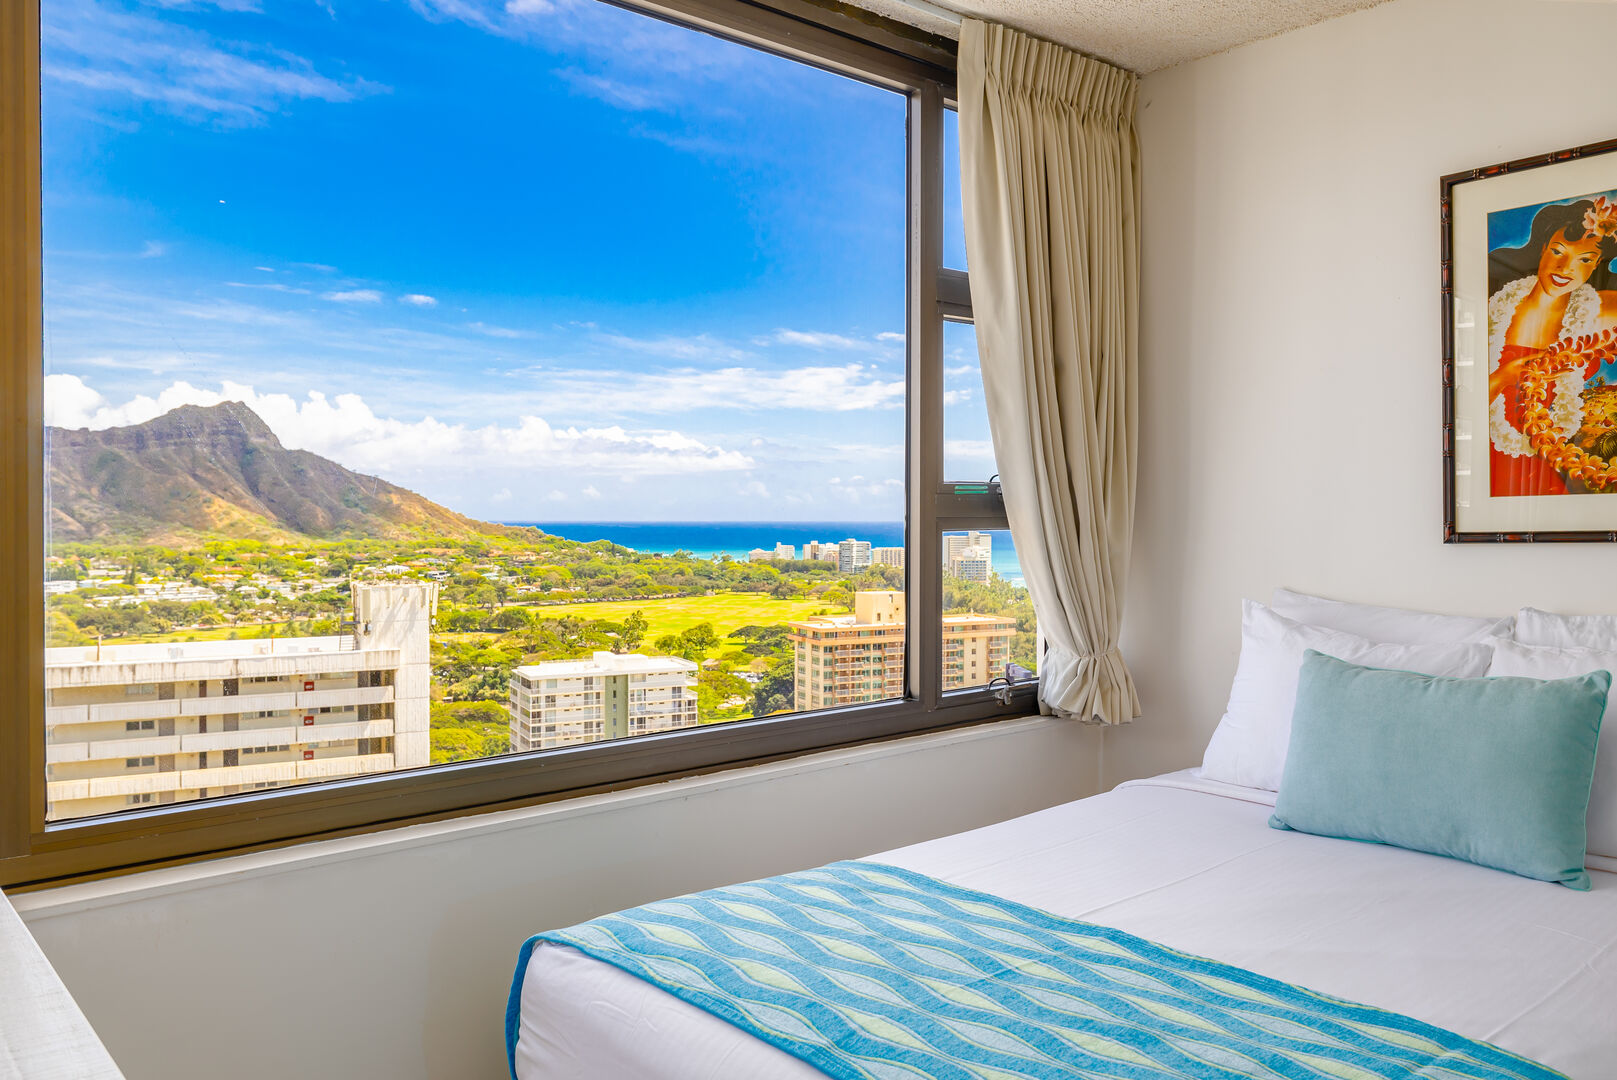 Bedroom with 1 queen size bed and 1 full size bed and Ocean and Diamond Head views